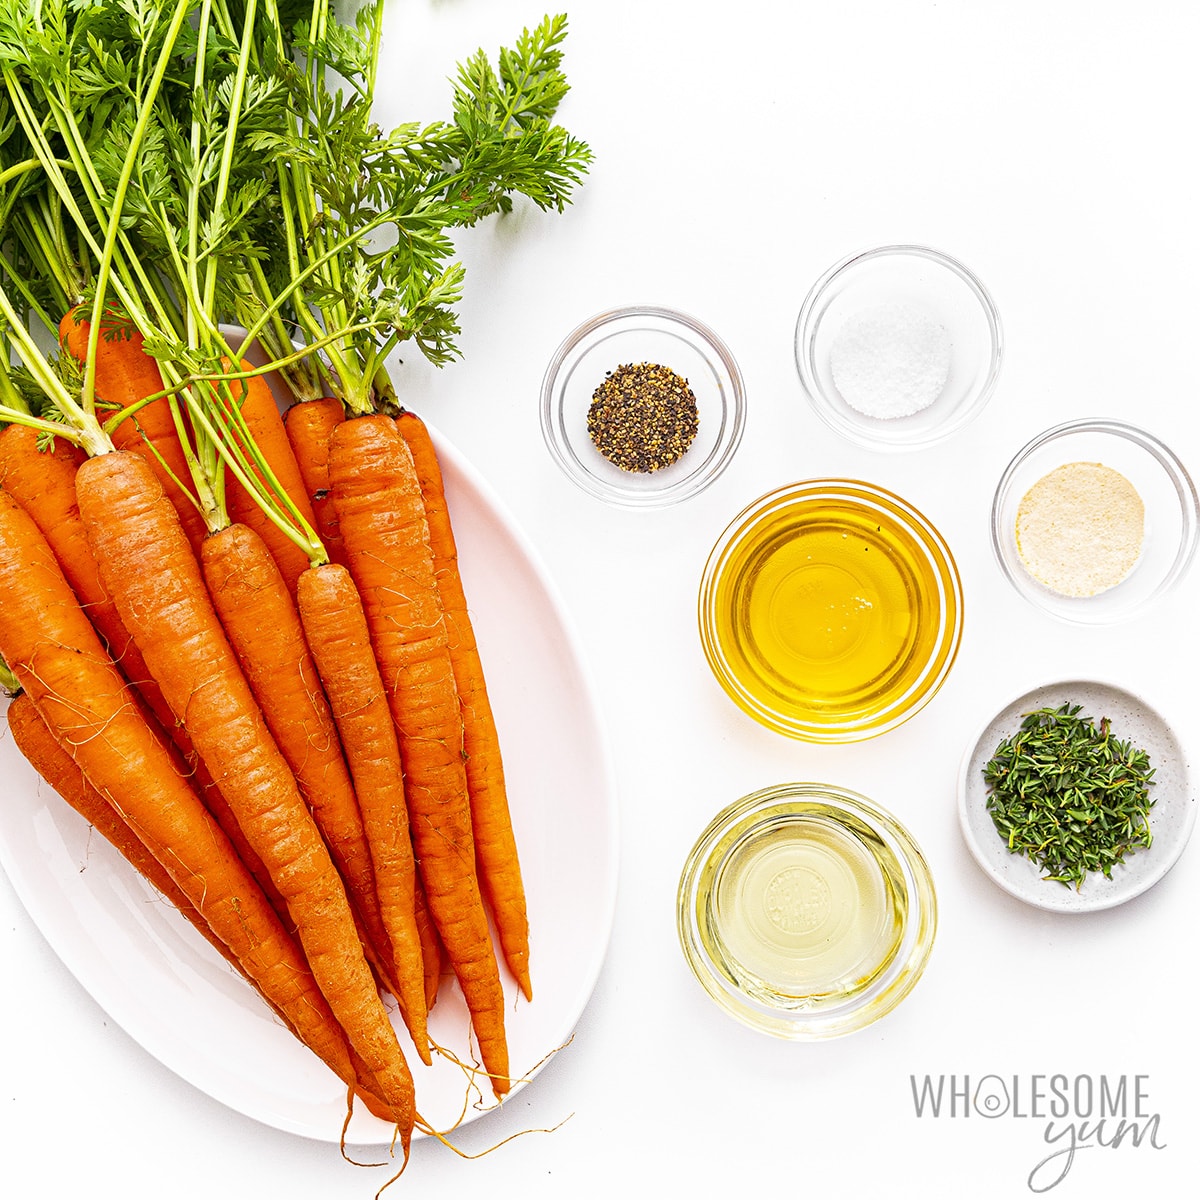 Roasted Carrots Recipe Ingredients.